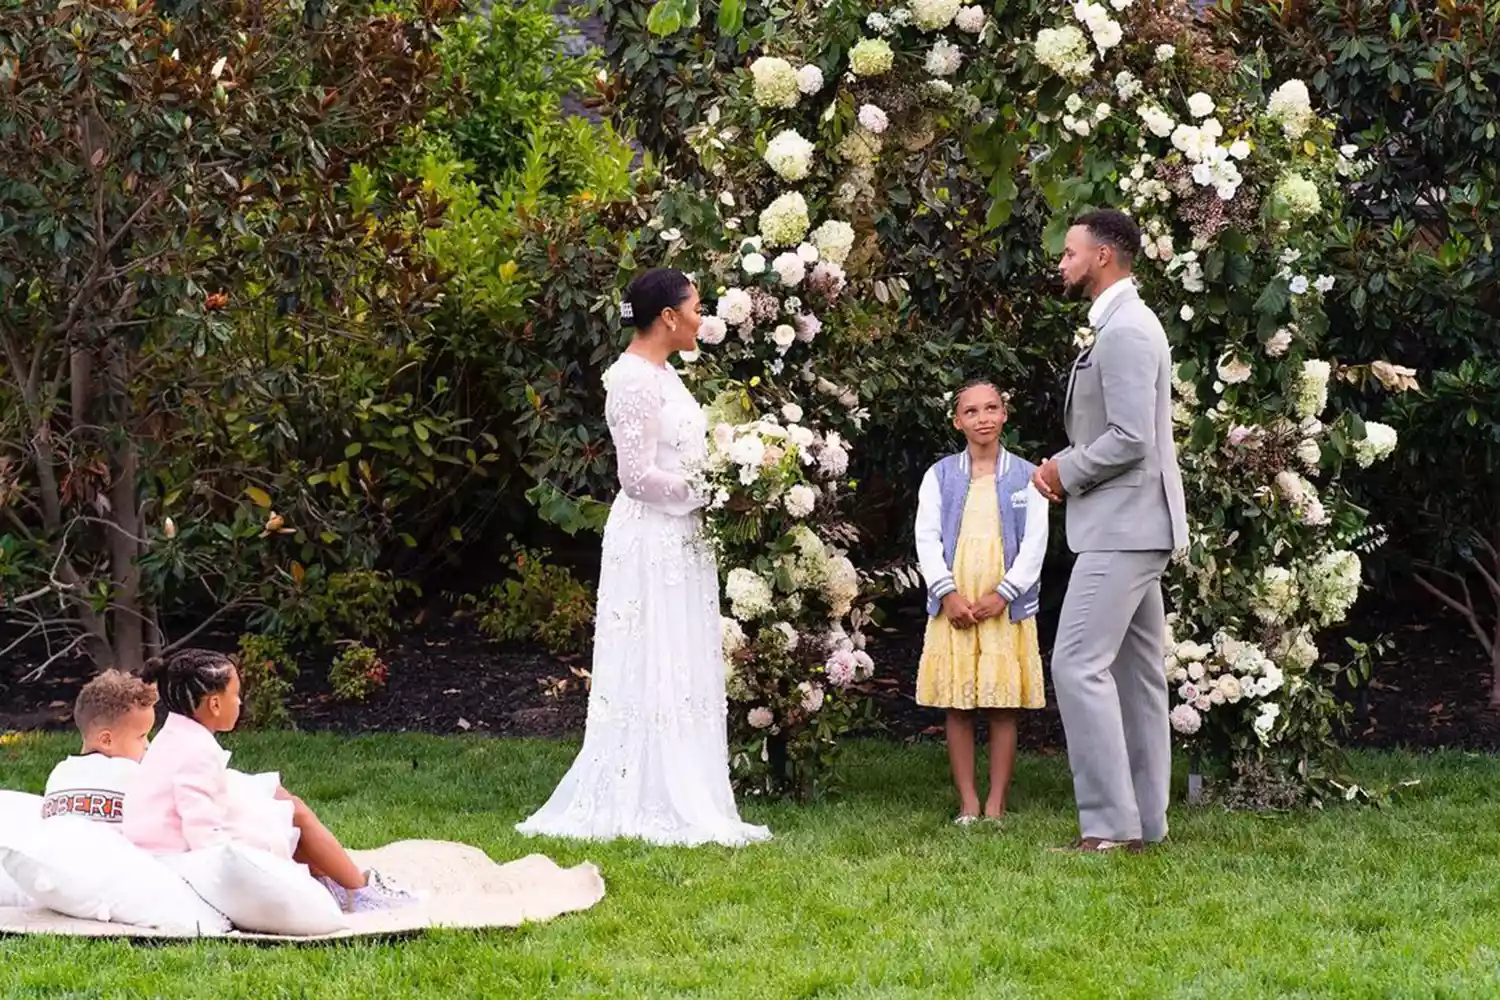 ChefLove! Stephen Curry threw his sweetie a 10-year wedding anniversary celebration with Ayesha Curry